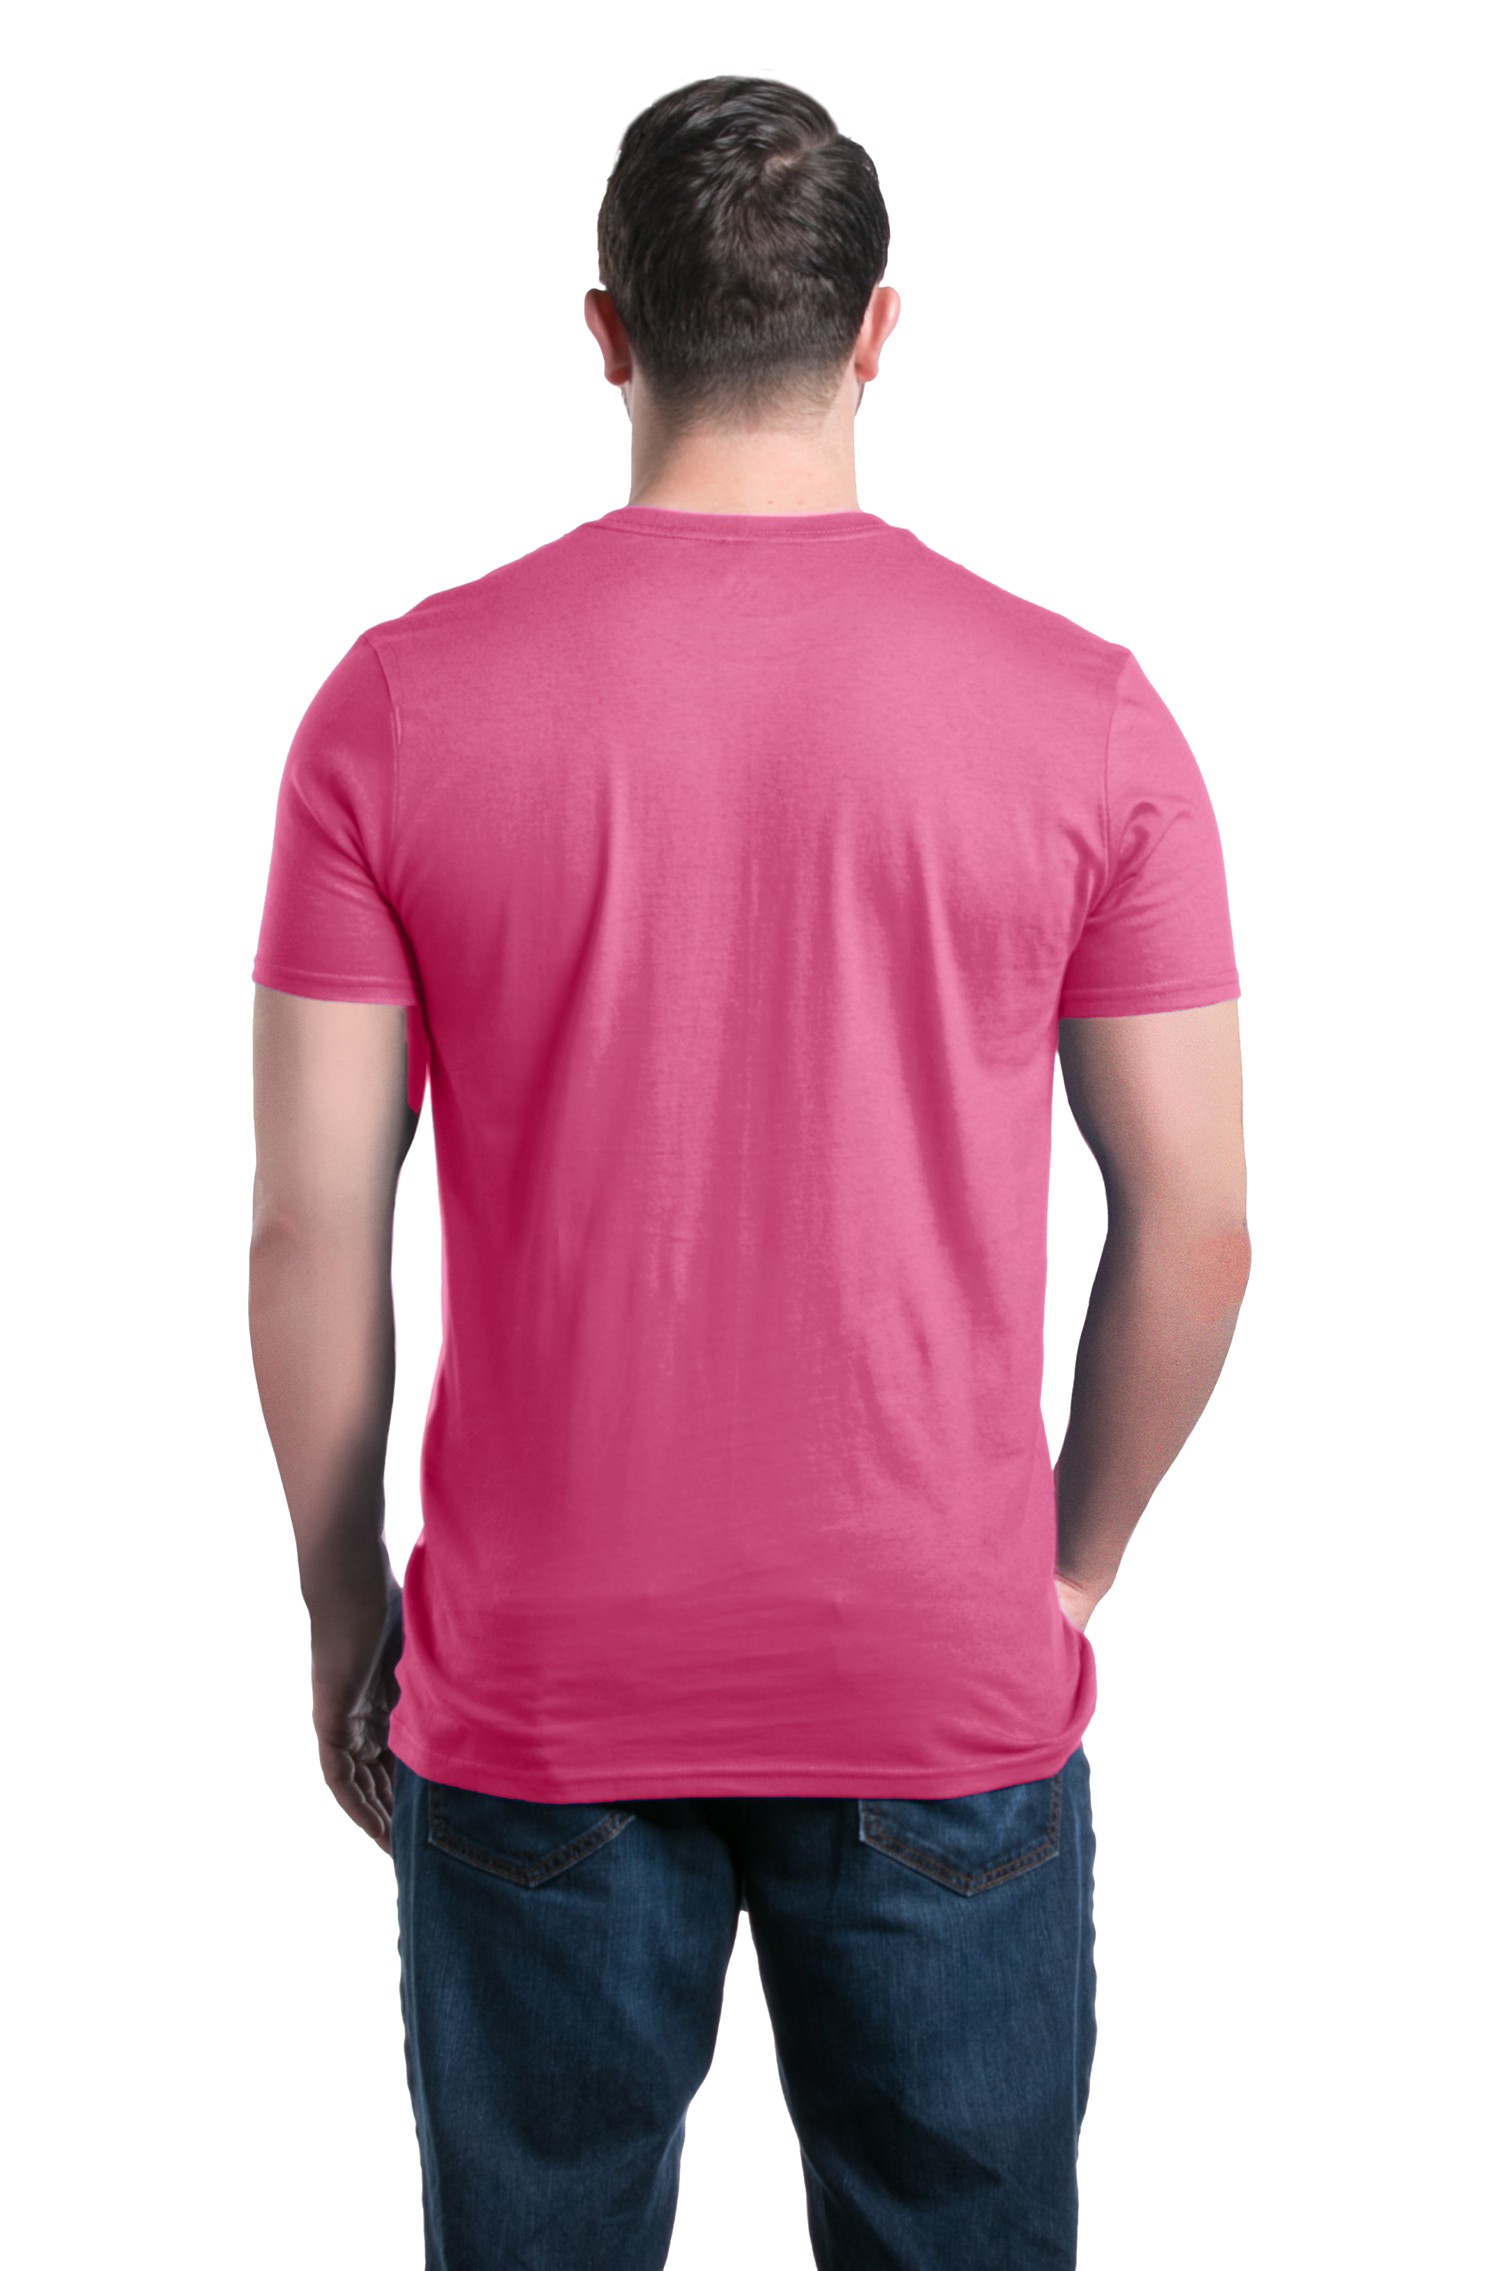 Shop4Ever Men's Tackle Breast Cancer Pink Ribbon Awareness Graphic T-shirt